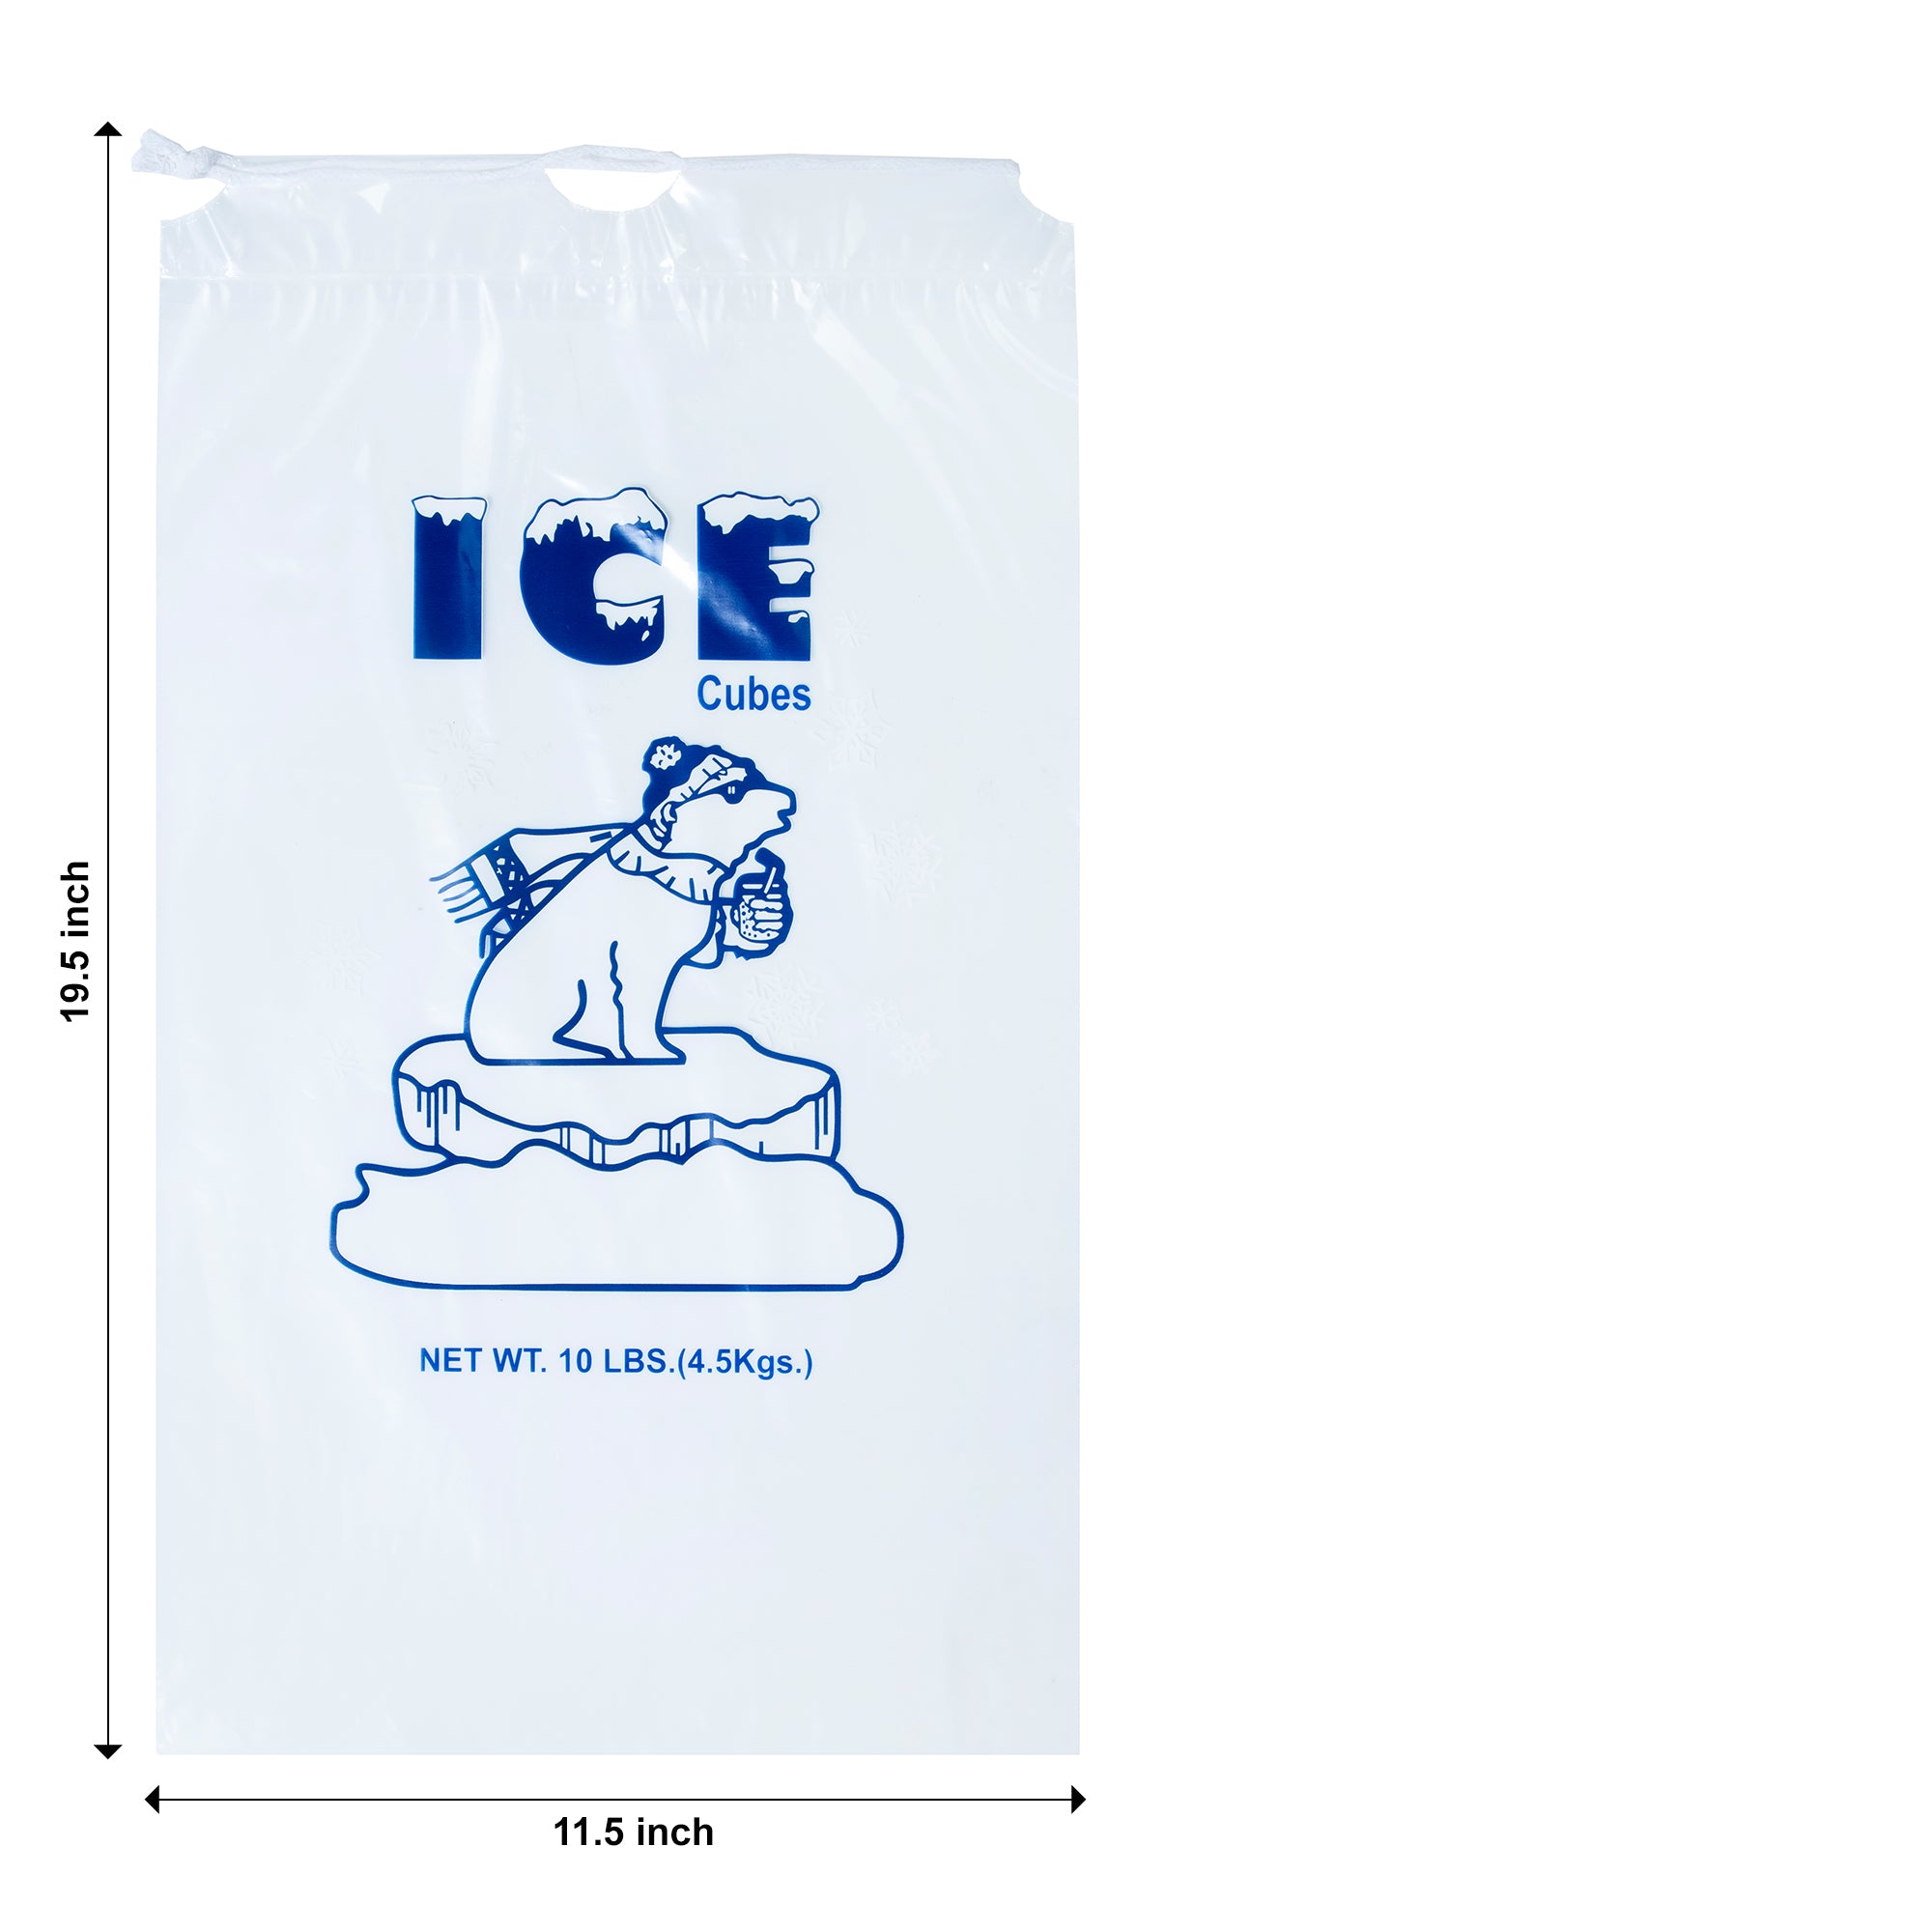 10 lbs ice bag with cotton drawstring anf size labled